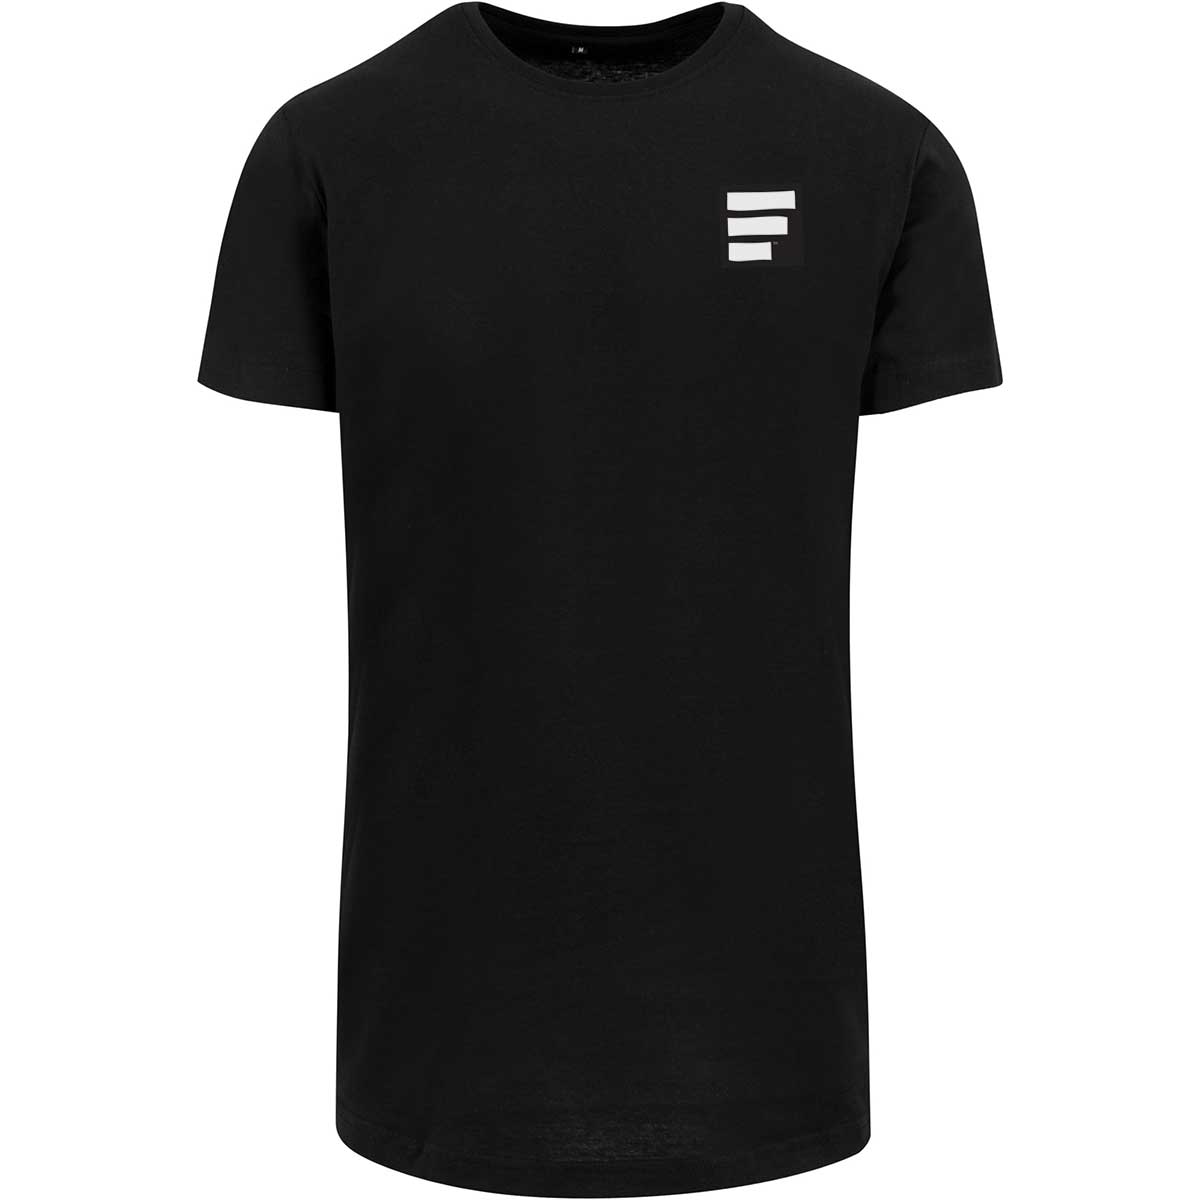 Longline T-Shirt BLOCK OUT - RIDERS GONNA RIDE®